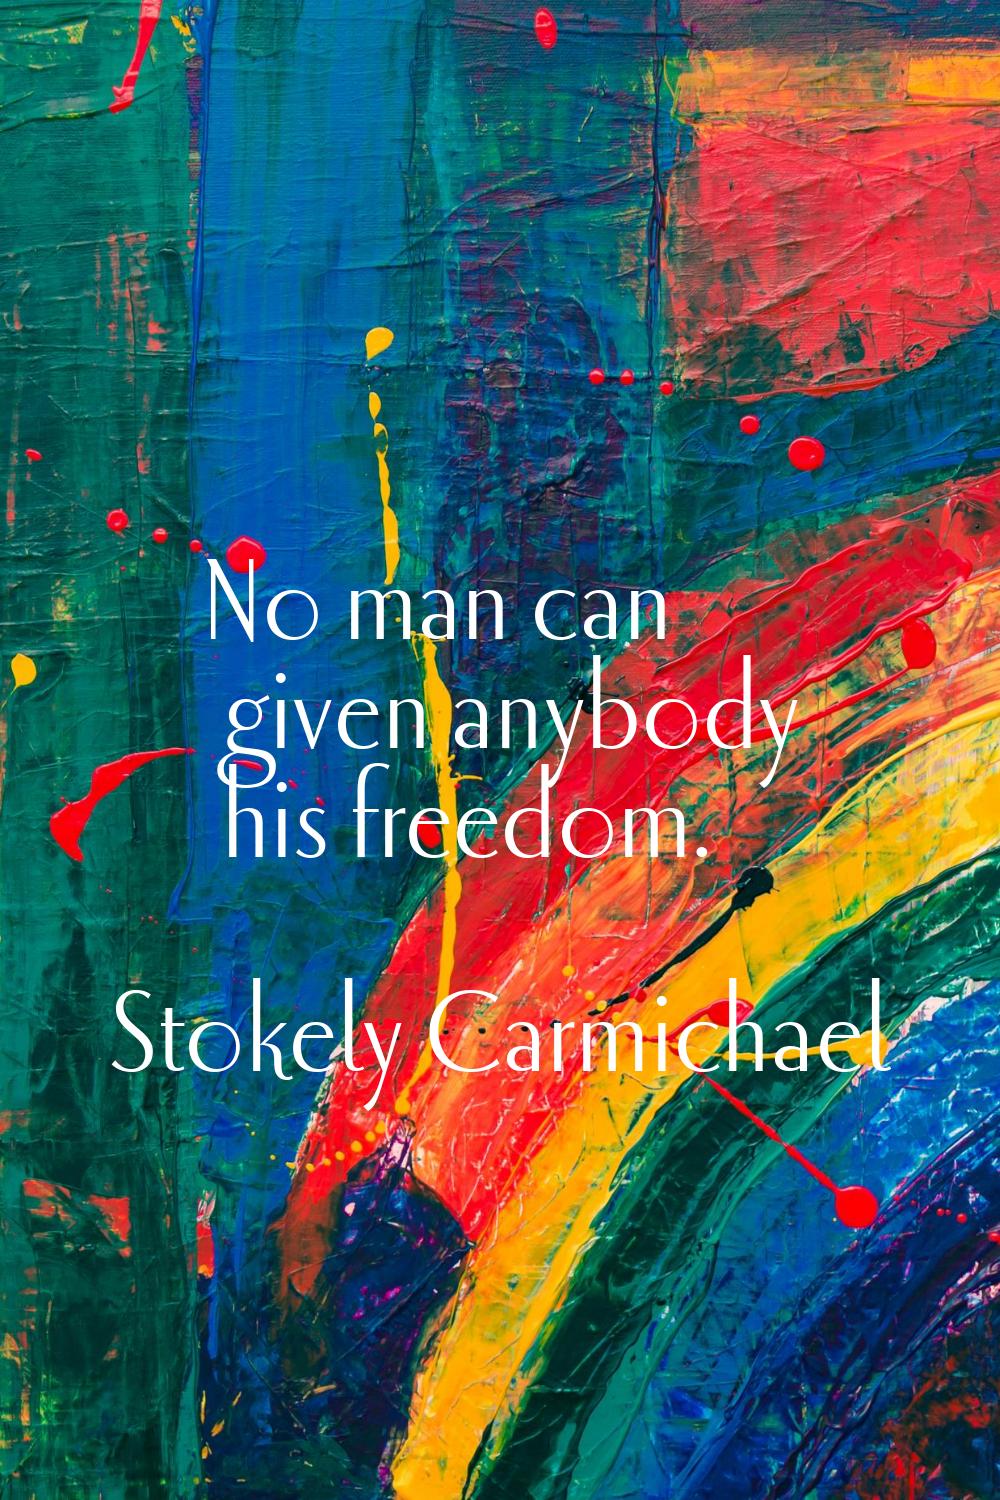 No man can given anybody his freedom.